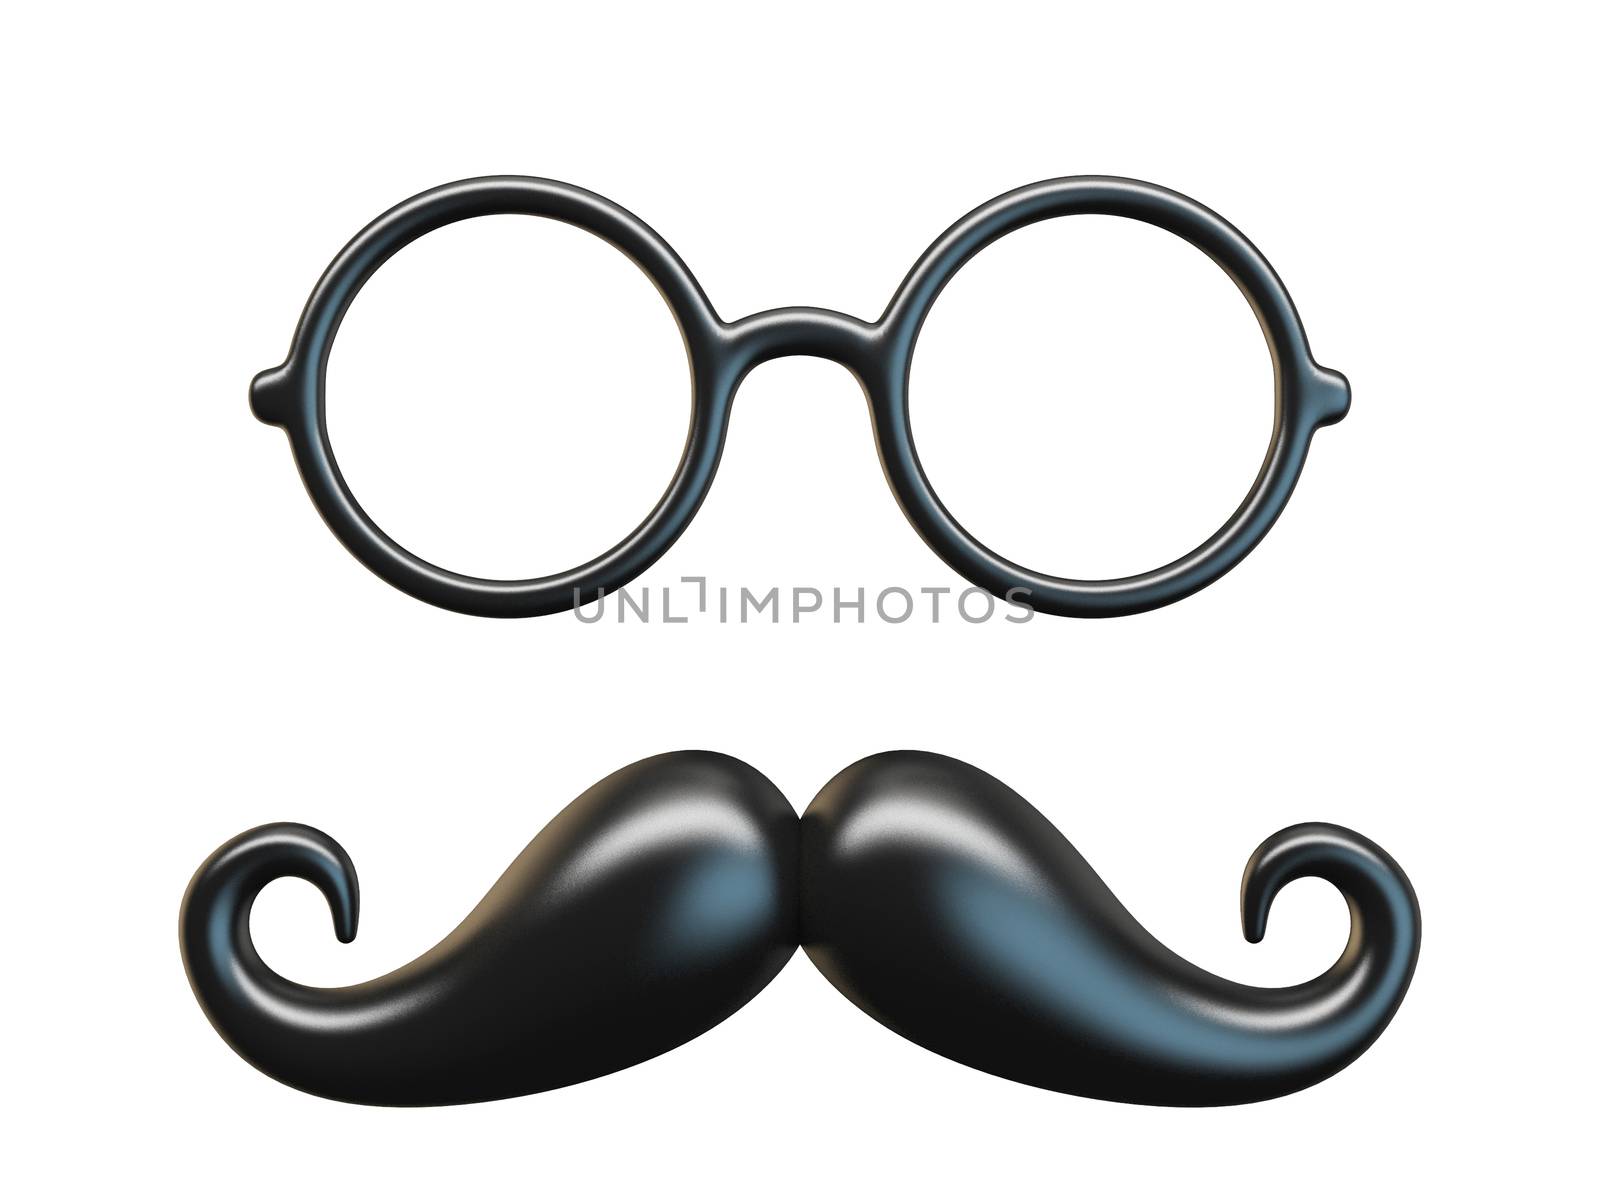 Black mustache and circular glasses 3D rendering by djmilic